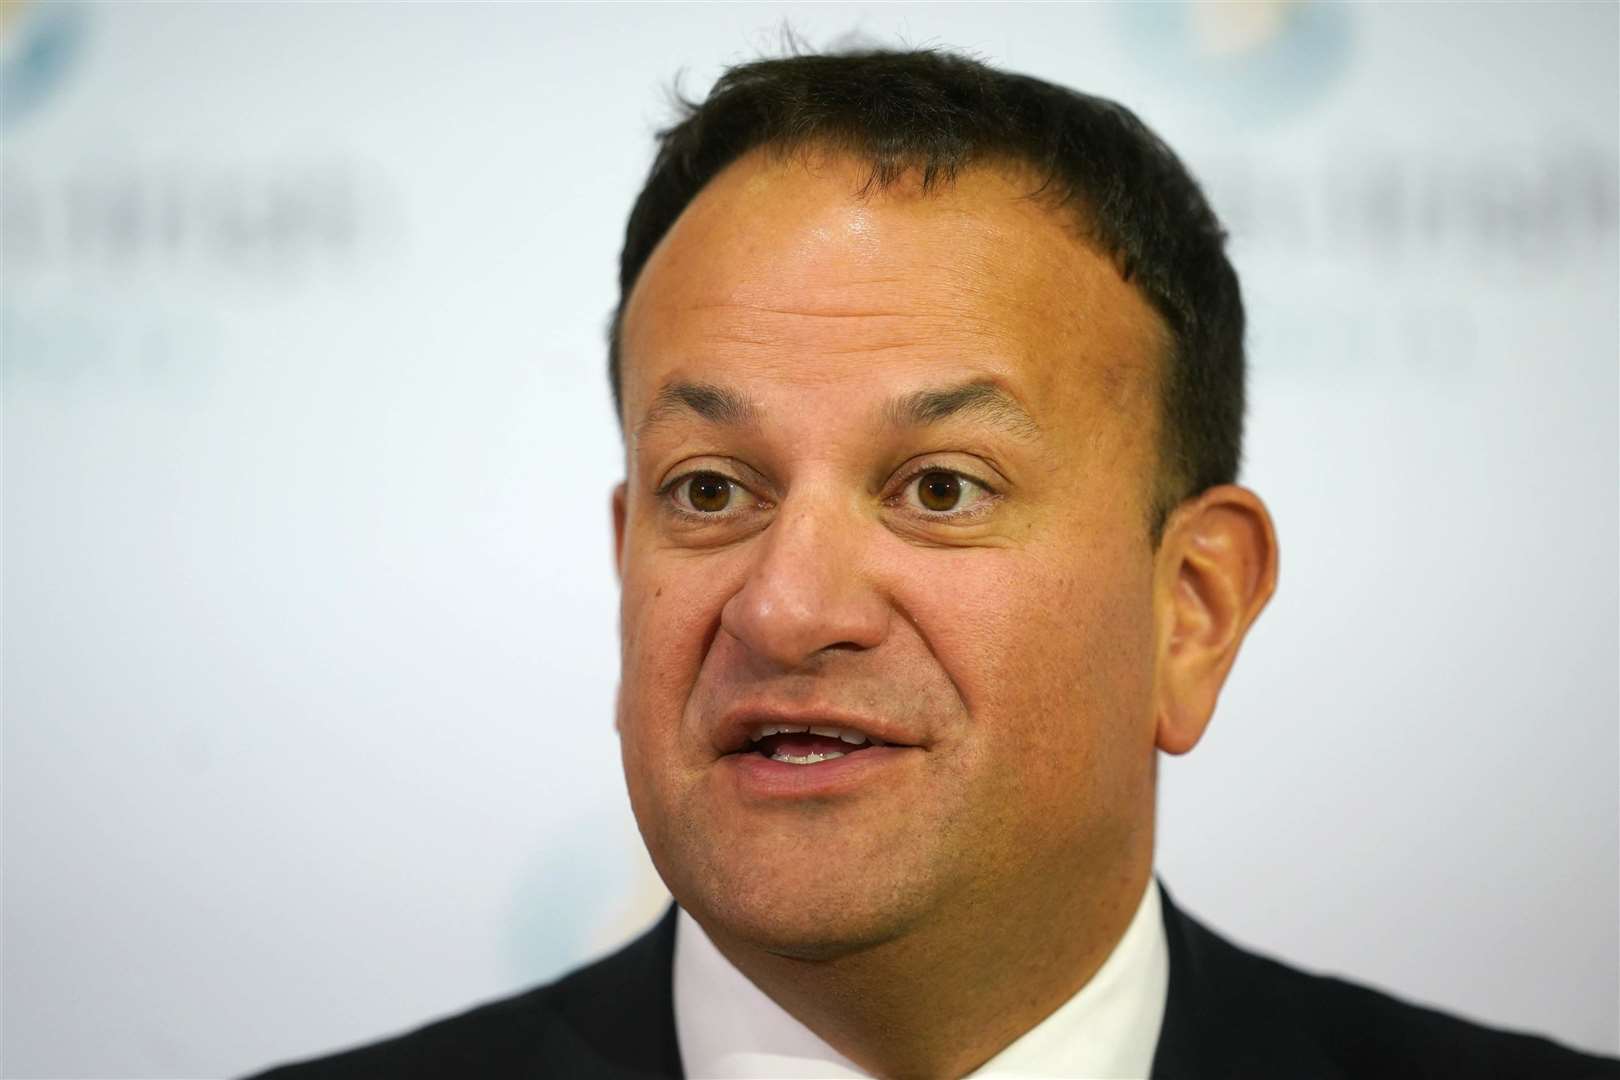 Taoiseach Leo Varadkar said it is Ireland’s ‘very strong view’ that there is no military solution to the conflict between Israel and Palestine (PA)